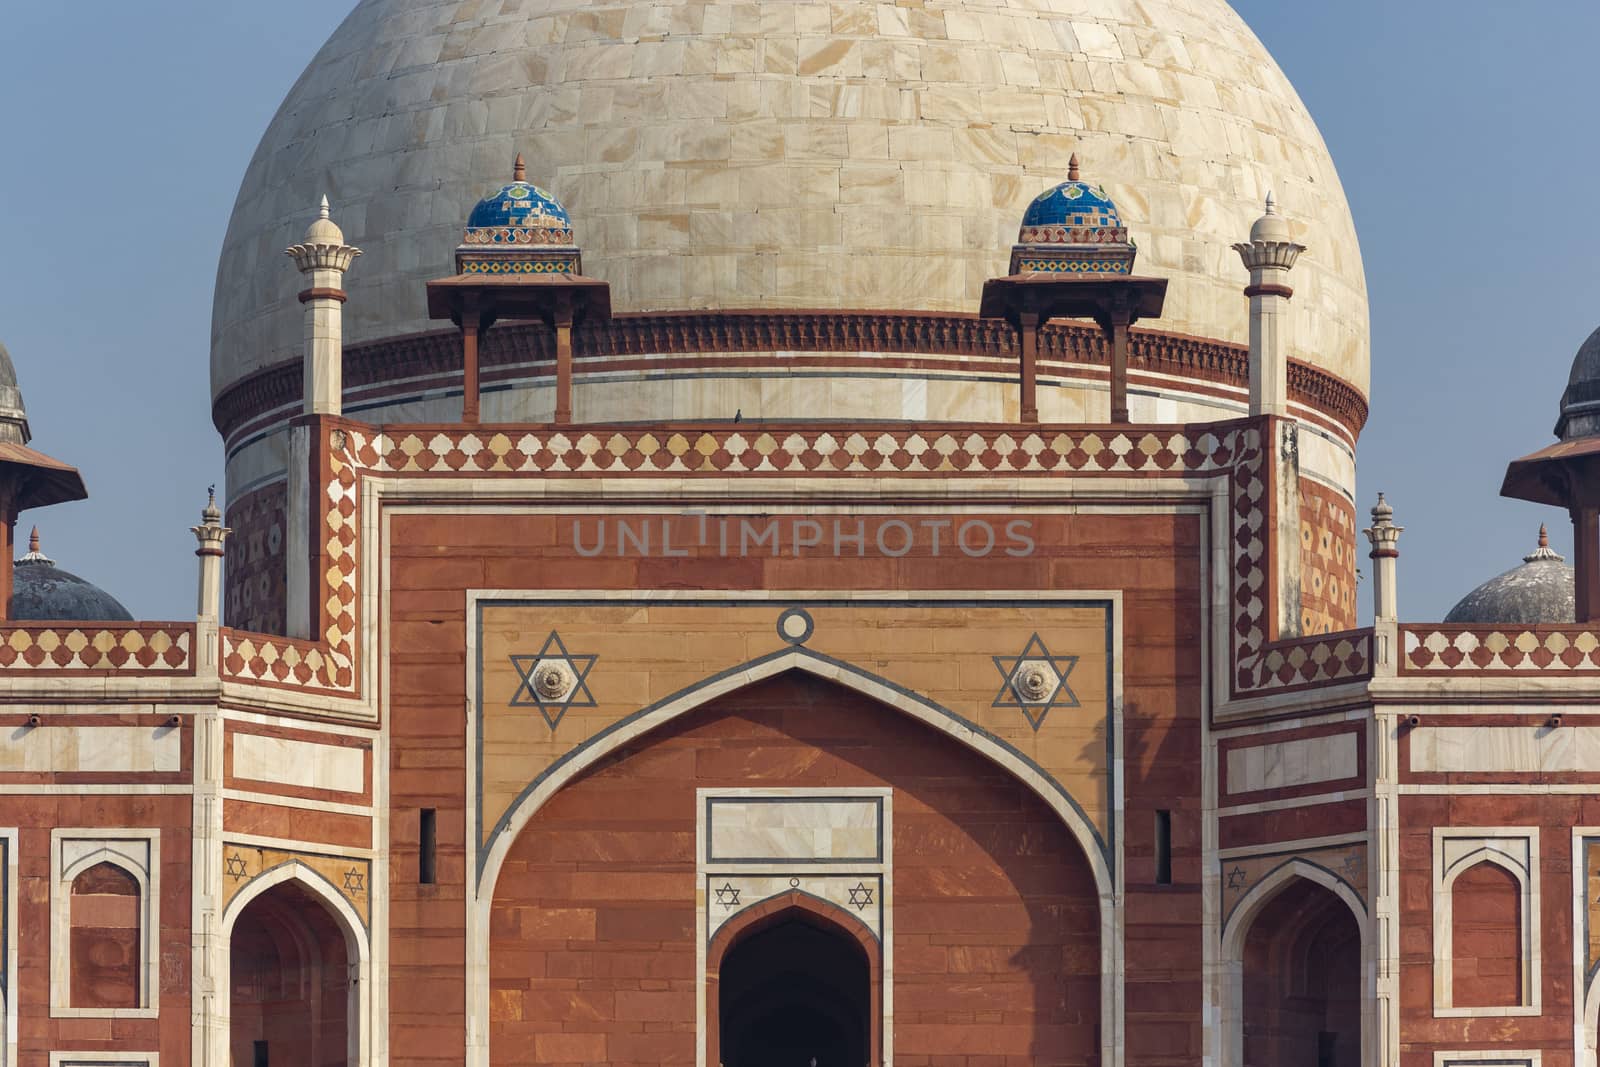 Detail of Humayun's tomb of Mughal Emperor Humayun designed by Persian architect Mirak Mirza Ghiyas in New Delhi, India